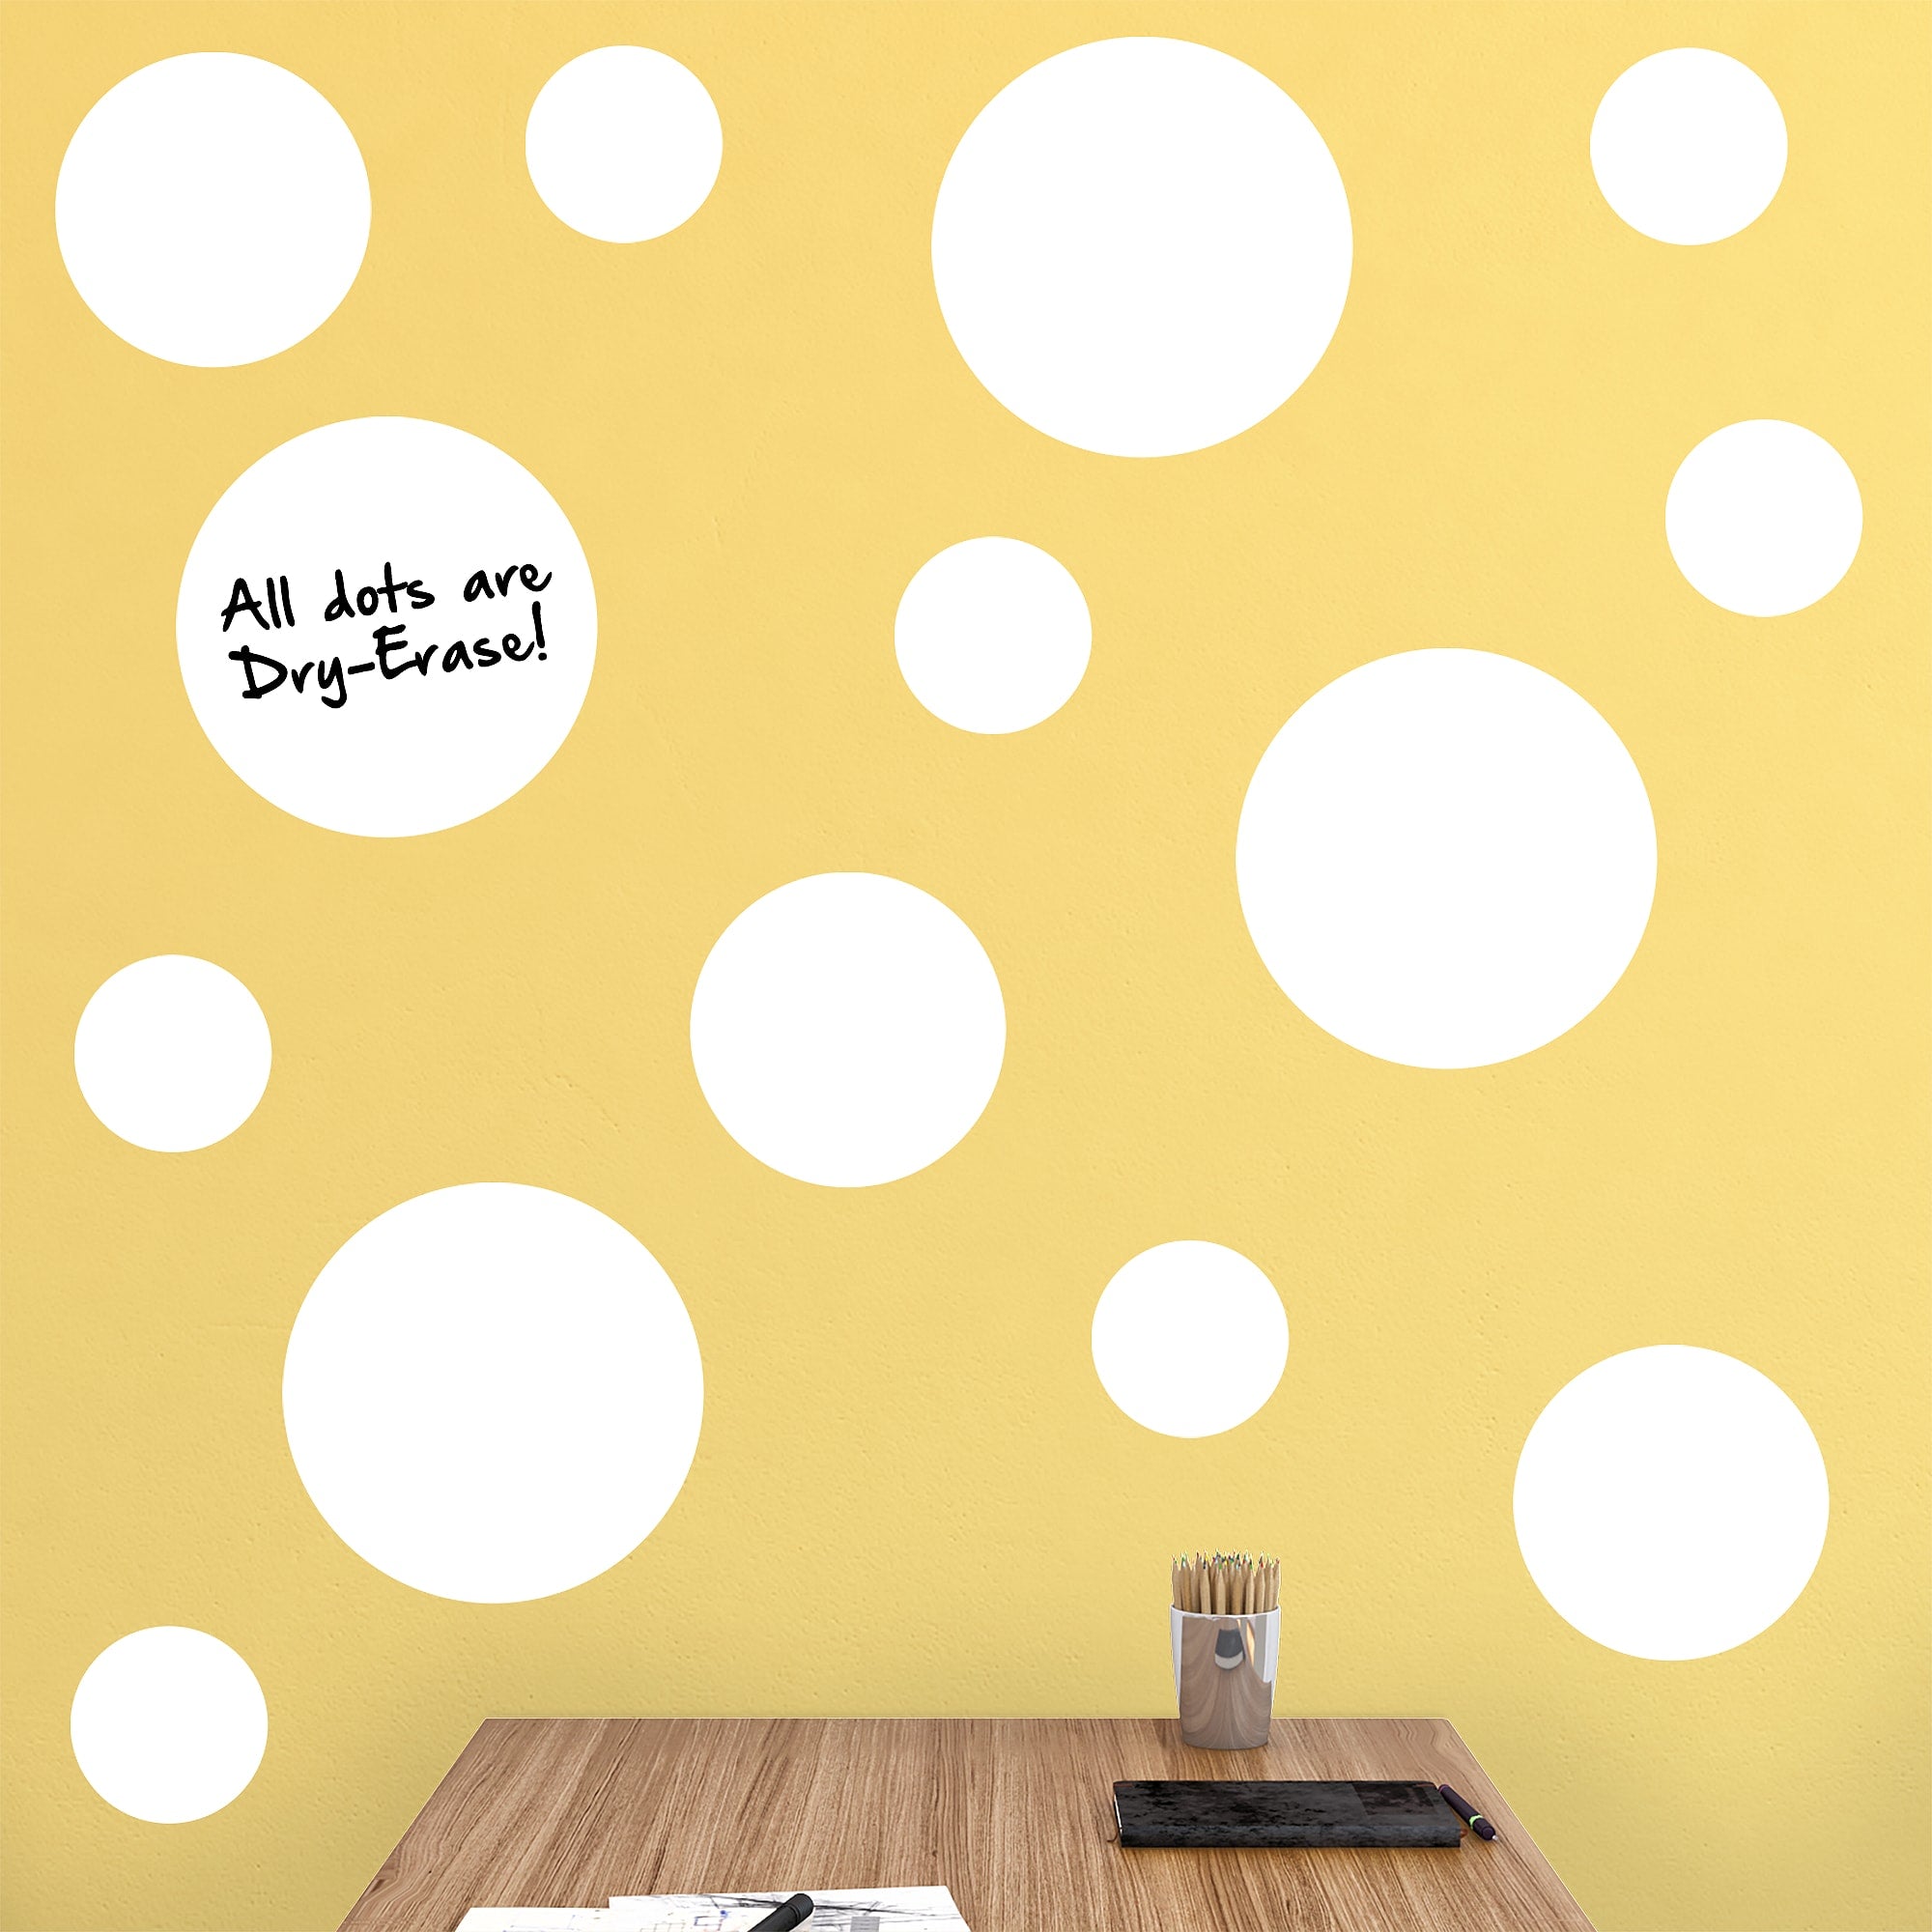 White Message Dots - Removable Dry Erase Vinyl Decal 54.0"W x 39.5"H by Fathead